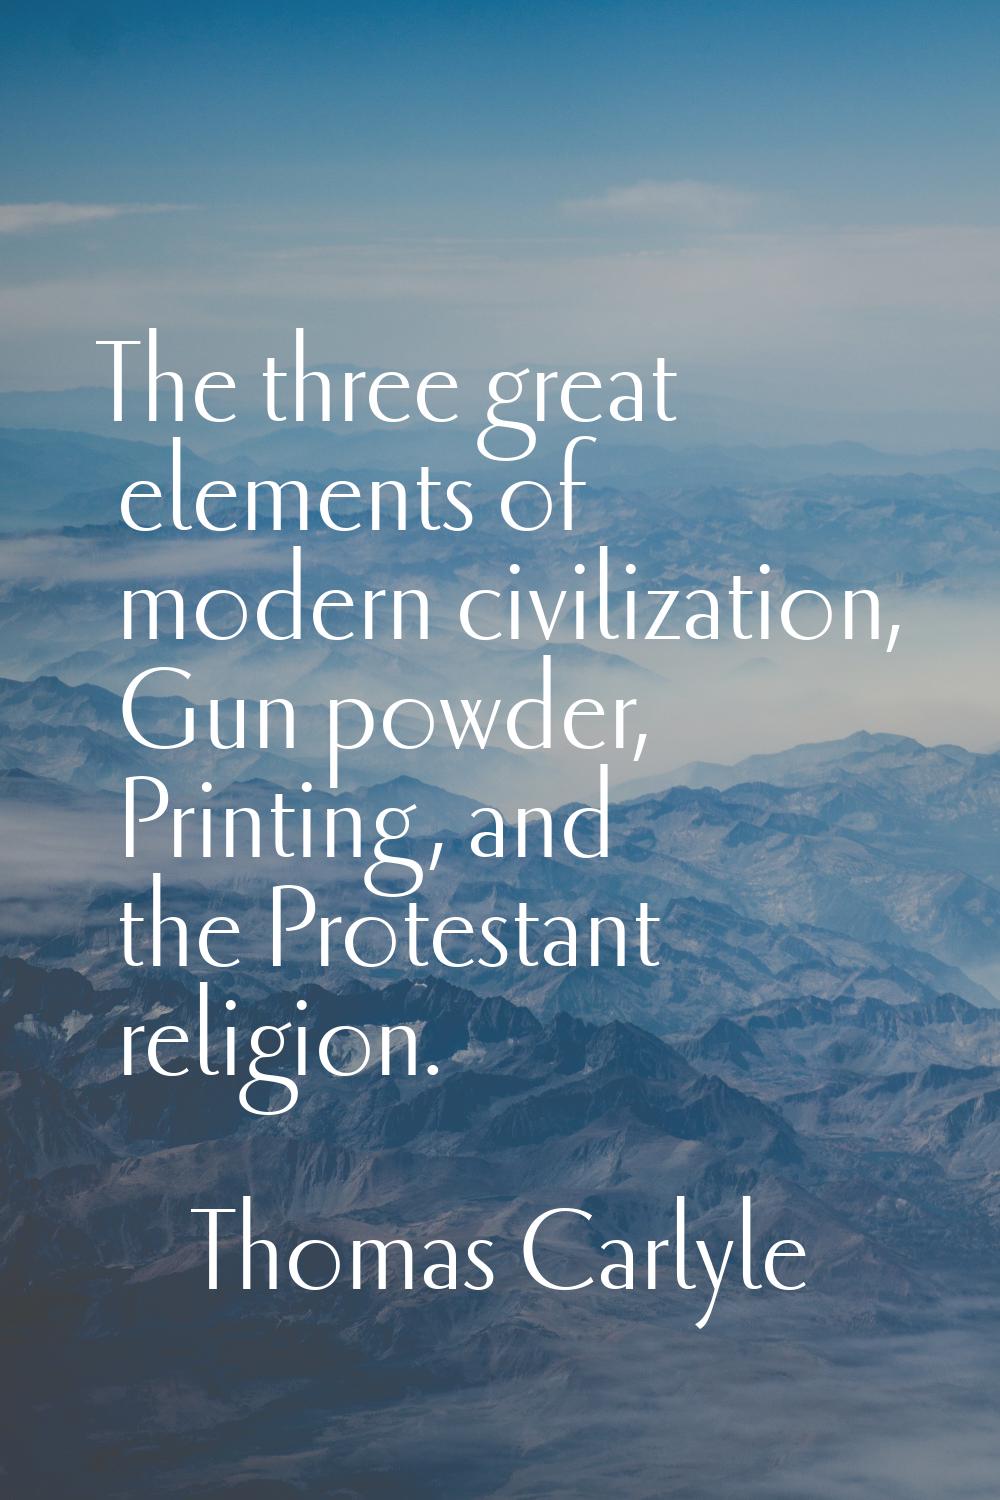 The three great elements of modern civilization, Gun powder, Printing, and the Protestant religion.